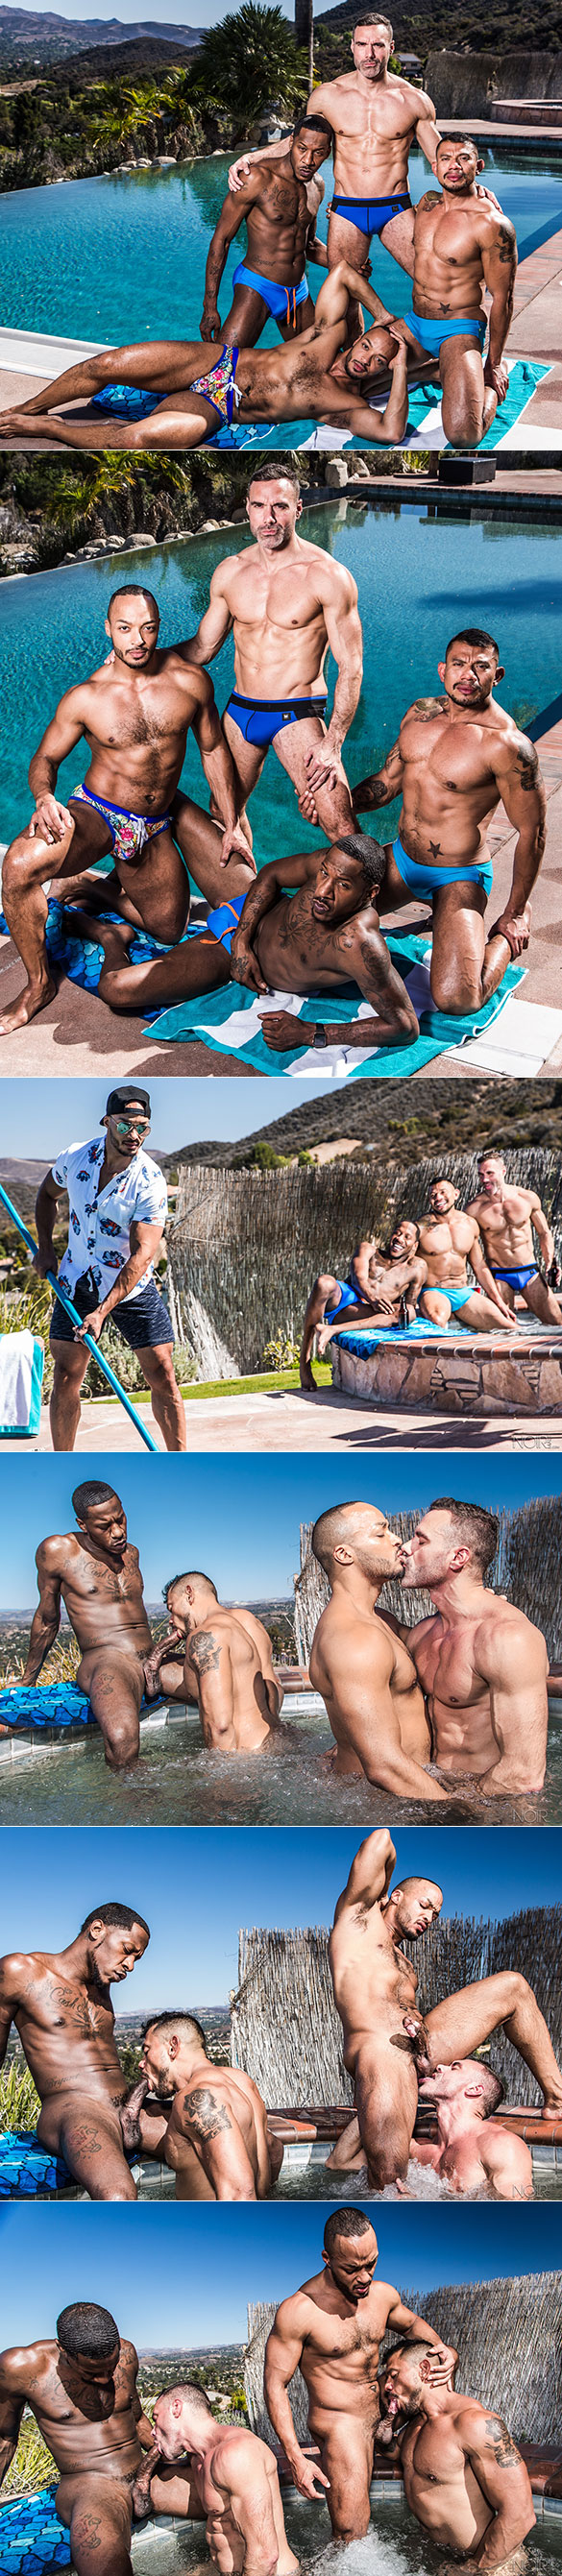 Noir Male: Deep Dicc and Manuel Skye fuck Dillon Diaz and Nico Santino in "Hot Tub Fourgy"